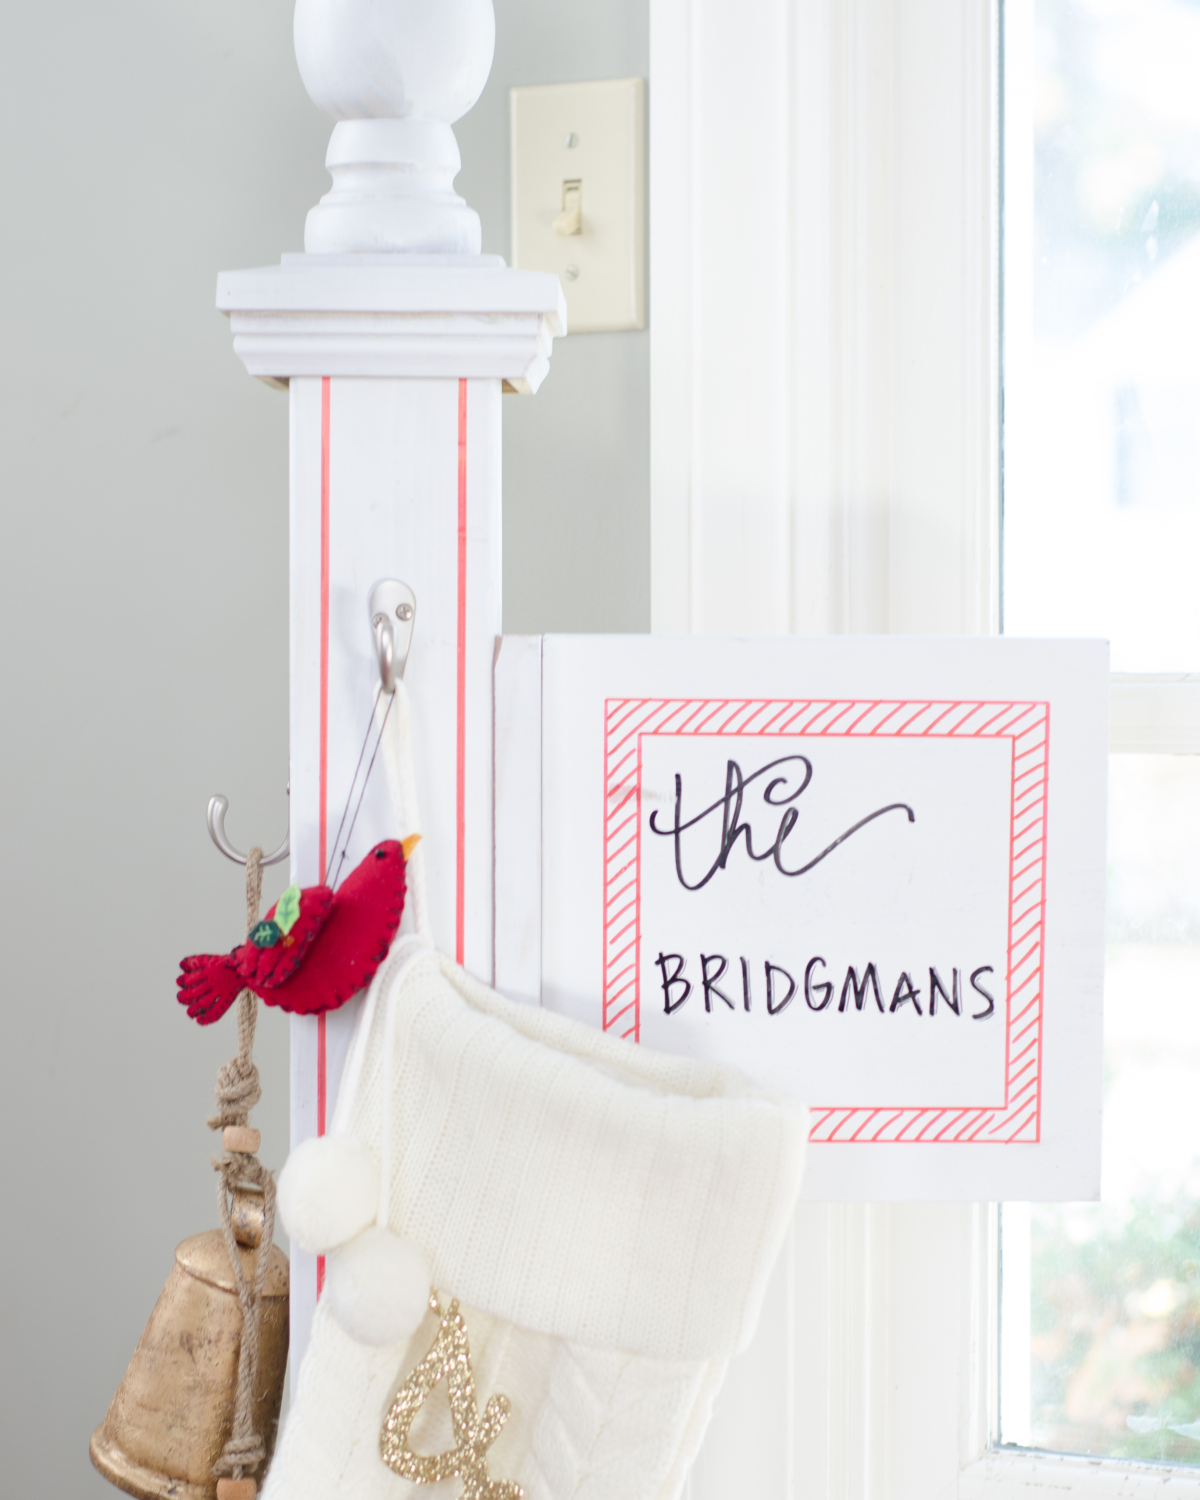 DIY Christmas stocking post - perfect if you don't have a mantle or just as a cute Christmas accent anywhere!